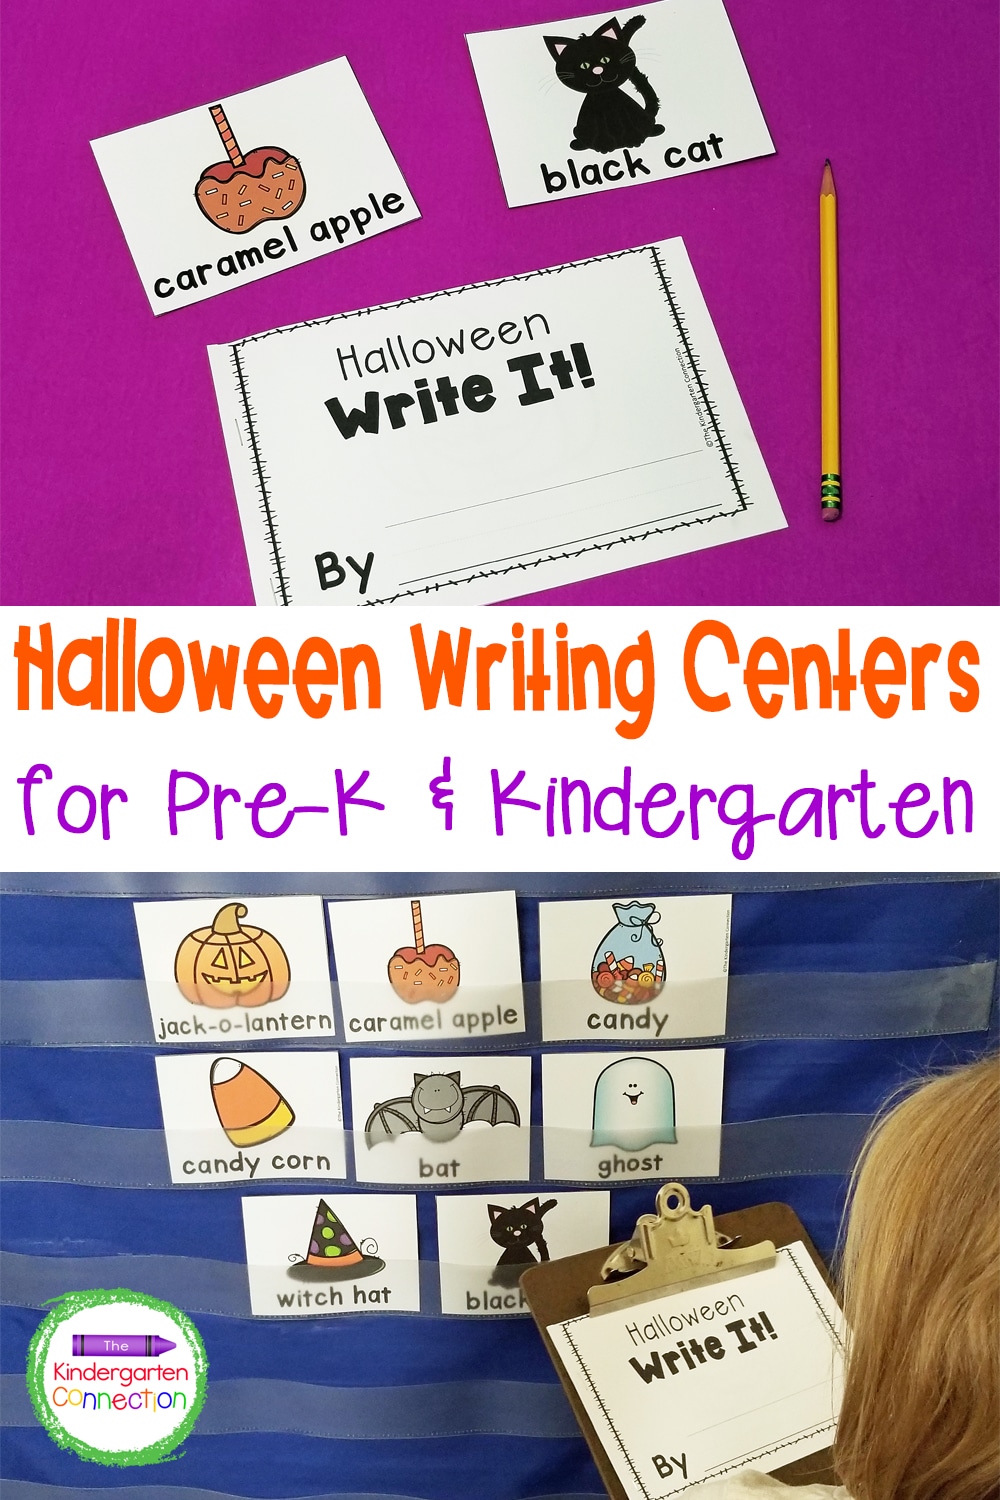 These Halloween Writing Activities for Pre-K & Kindergarten are perfect for early writers to practice labeling, sentence writing, and more!